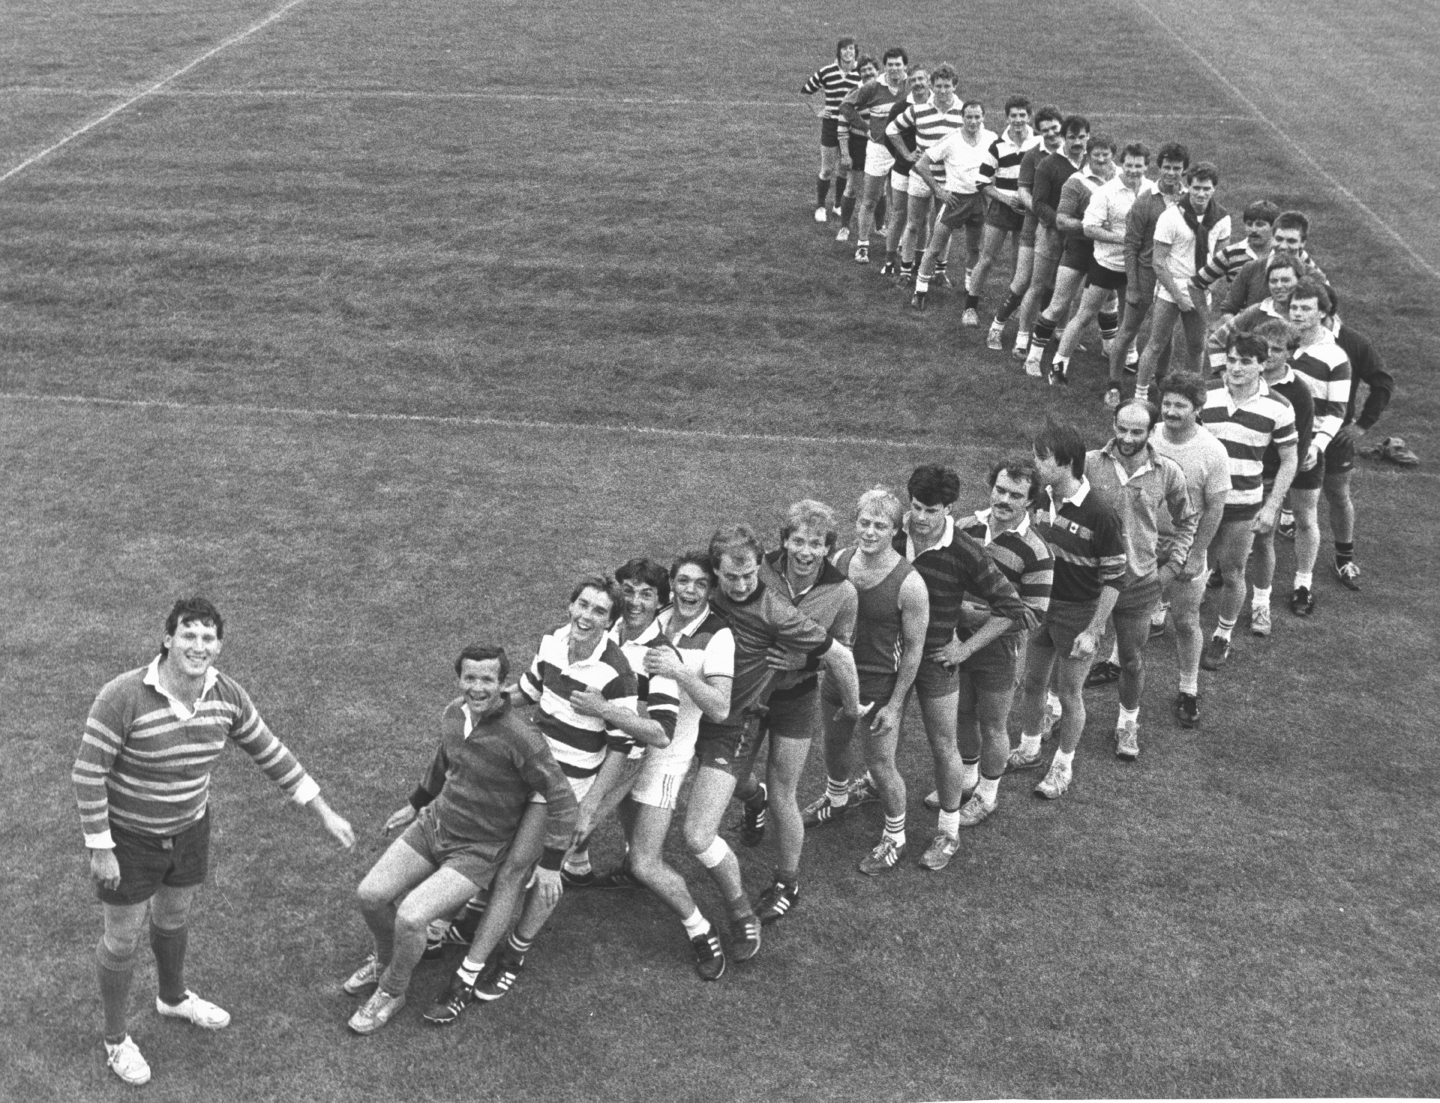 Captain of Grammar FP Rugby Club Benny Elrick, left, supervises a practice attempt at setting a human domino spill world record with club members at Rubislaw Playing Fields in 1984.